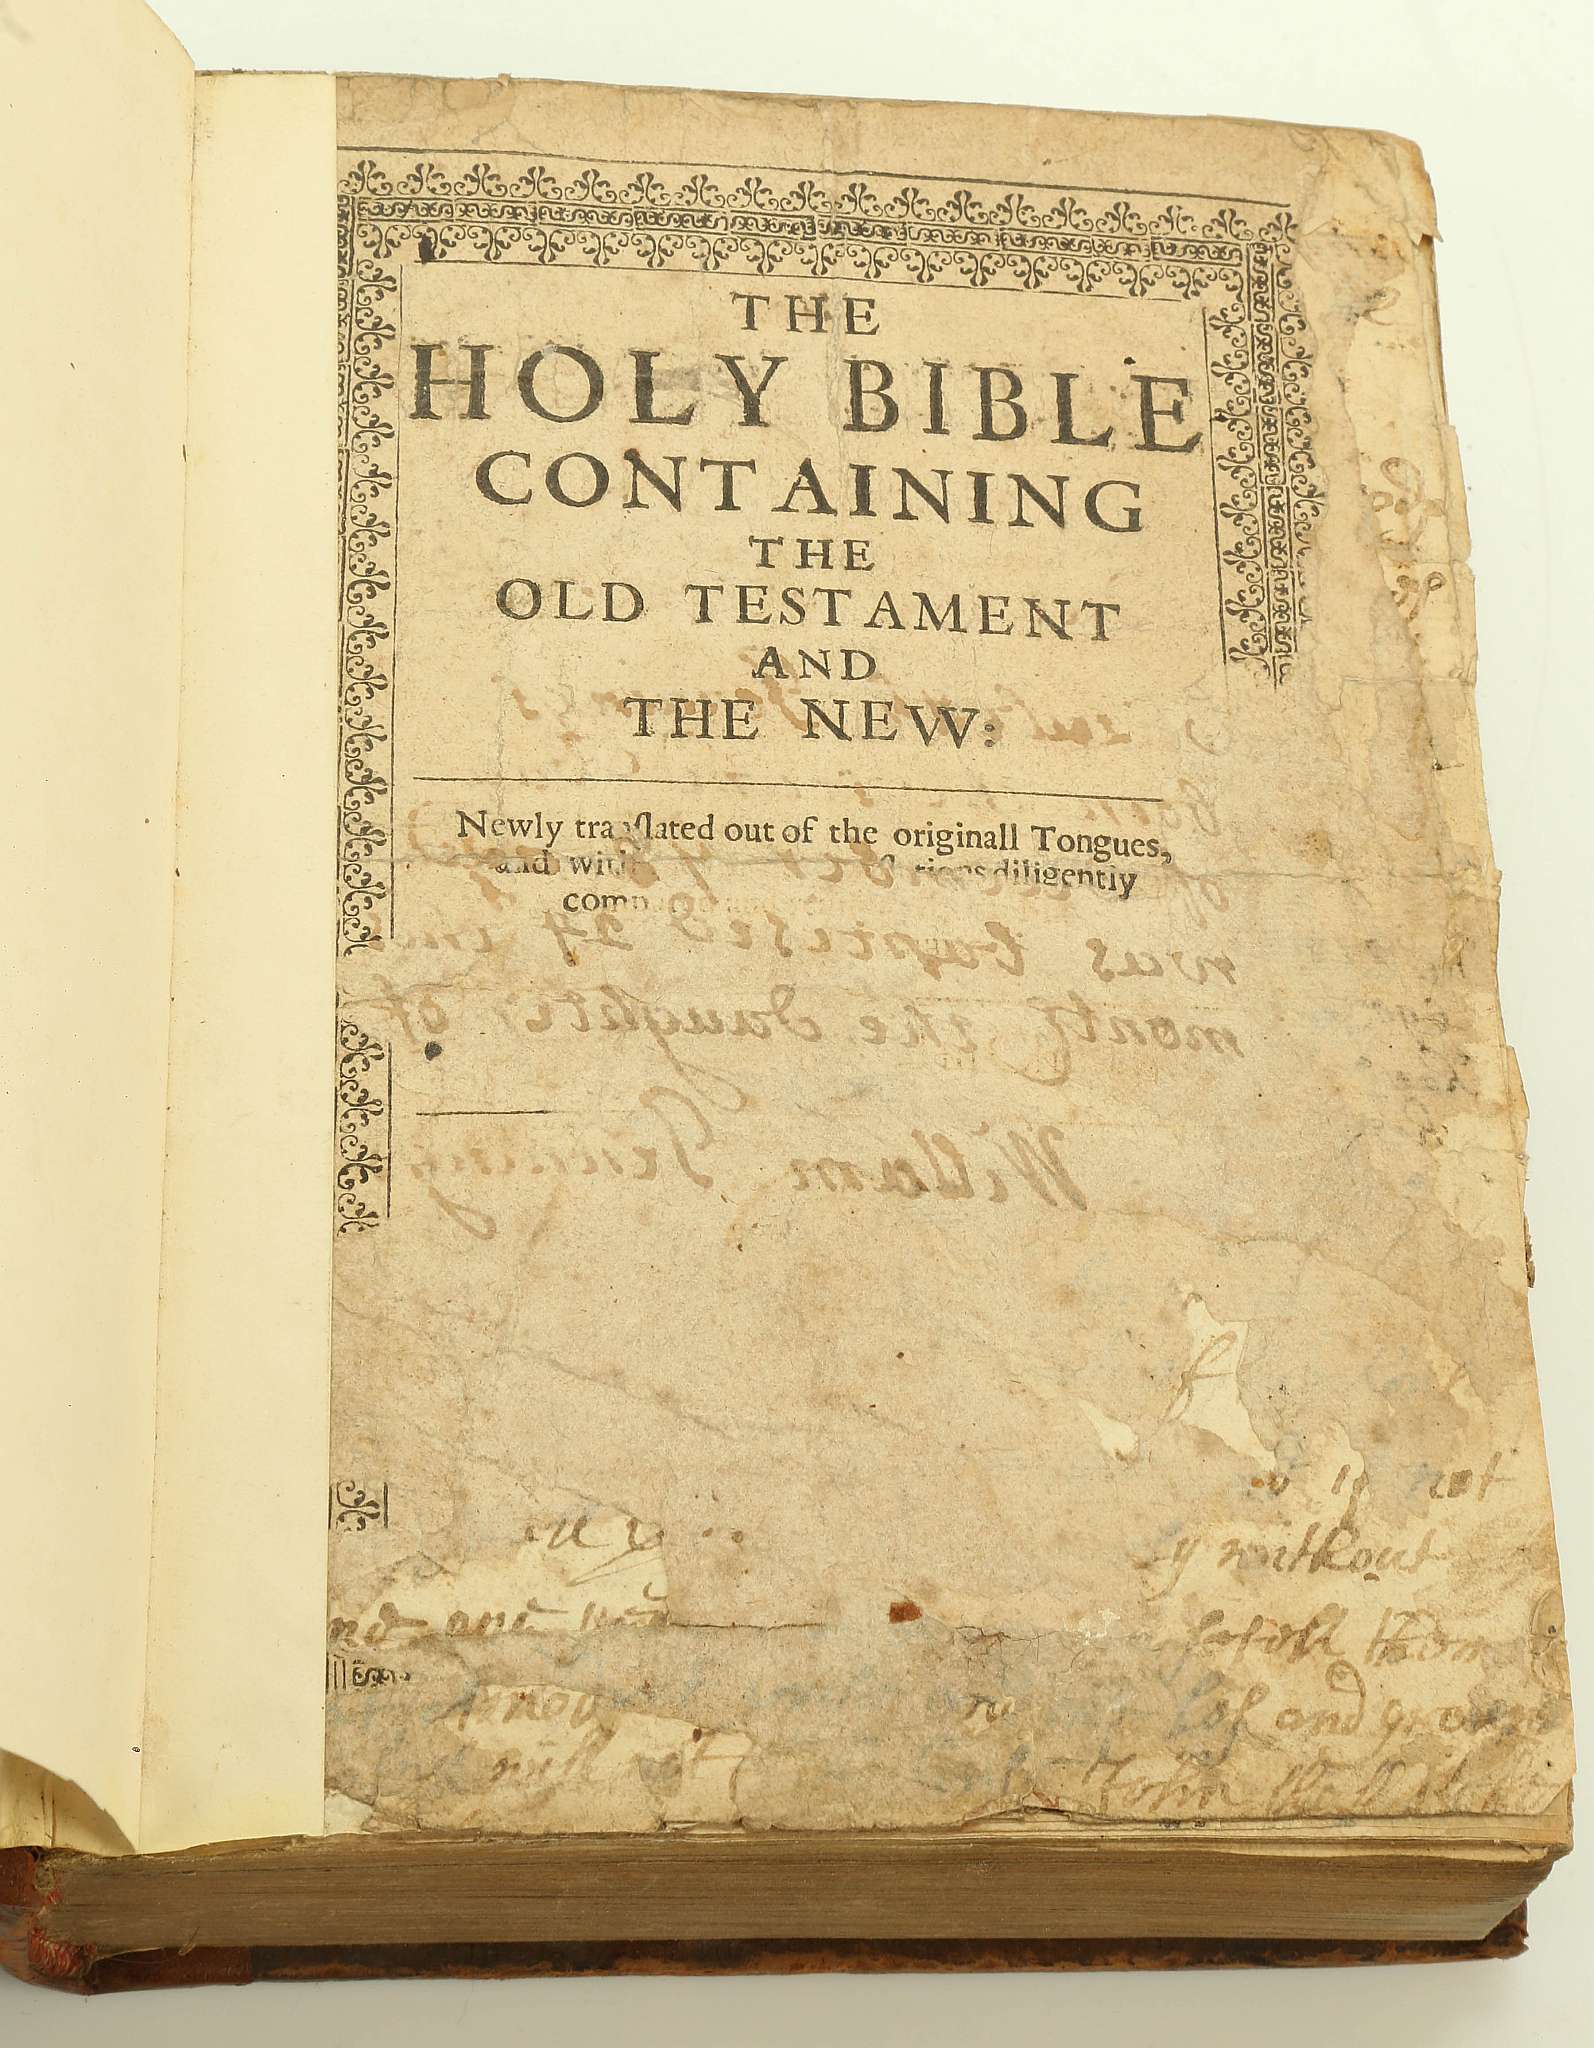 The Holy Bible Containing the Old Testament and the New. Cambridge, [no pub],  1637. 4to. (Title - Image 3 of 5